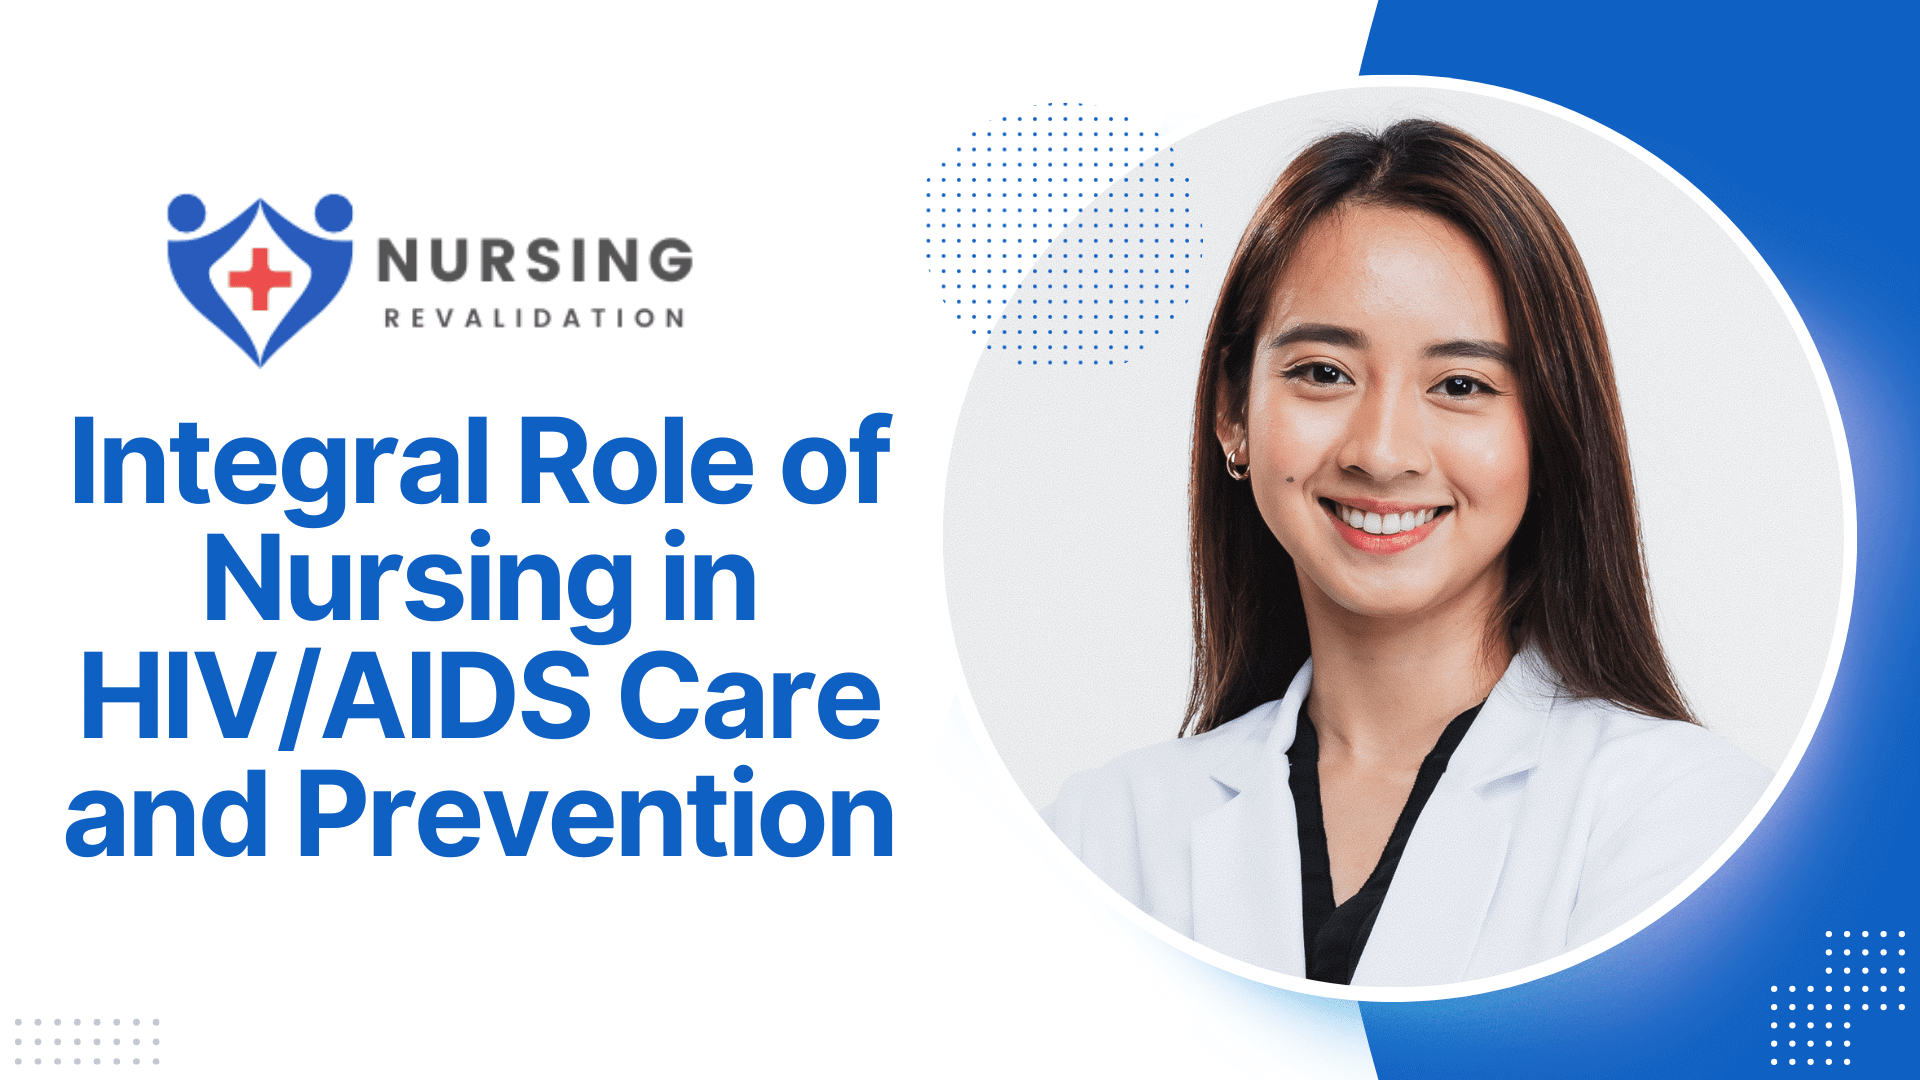 Integral Role of Nursing in HIV/AIDS Care and Prevention